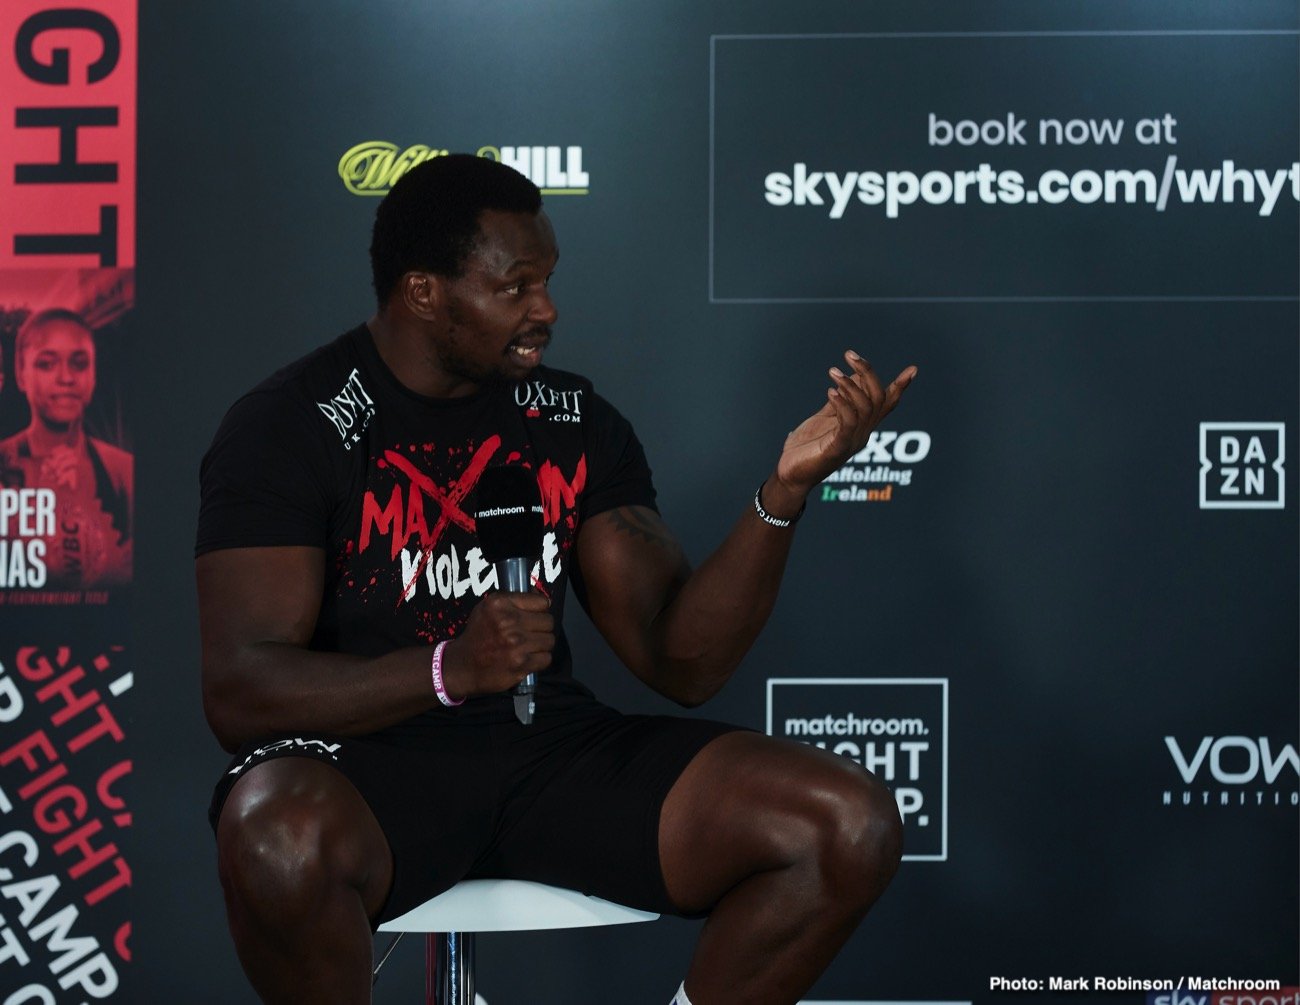 Image: Dillian Whyte says Fury has "No choice" but to fight him unless he bins his WBC belt